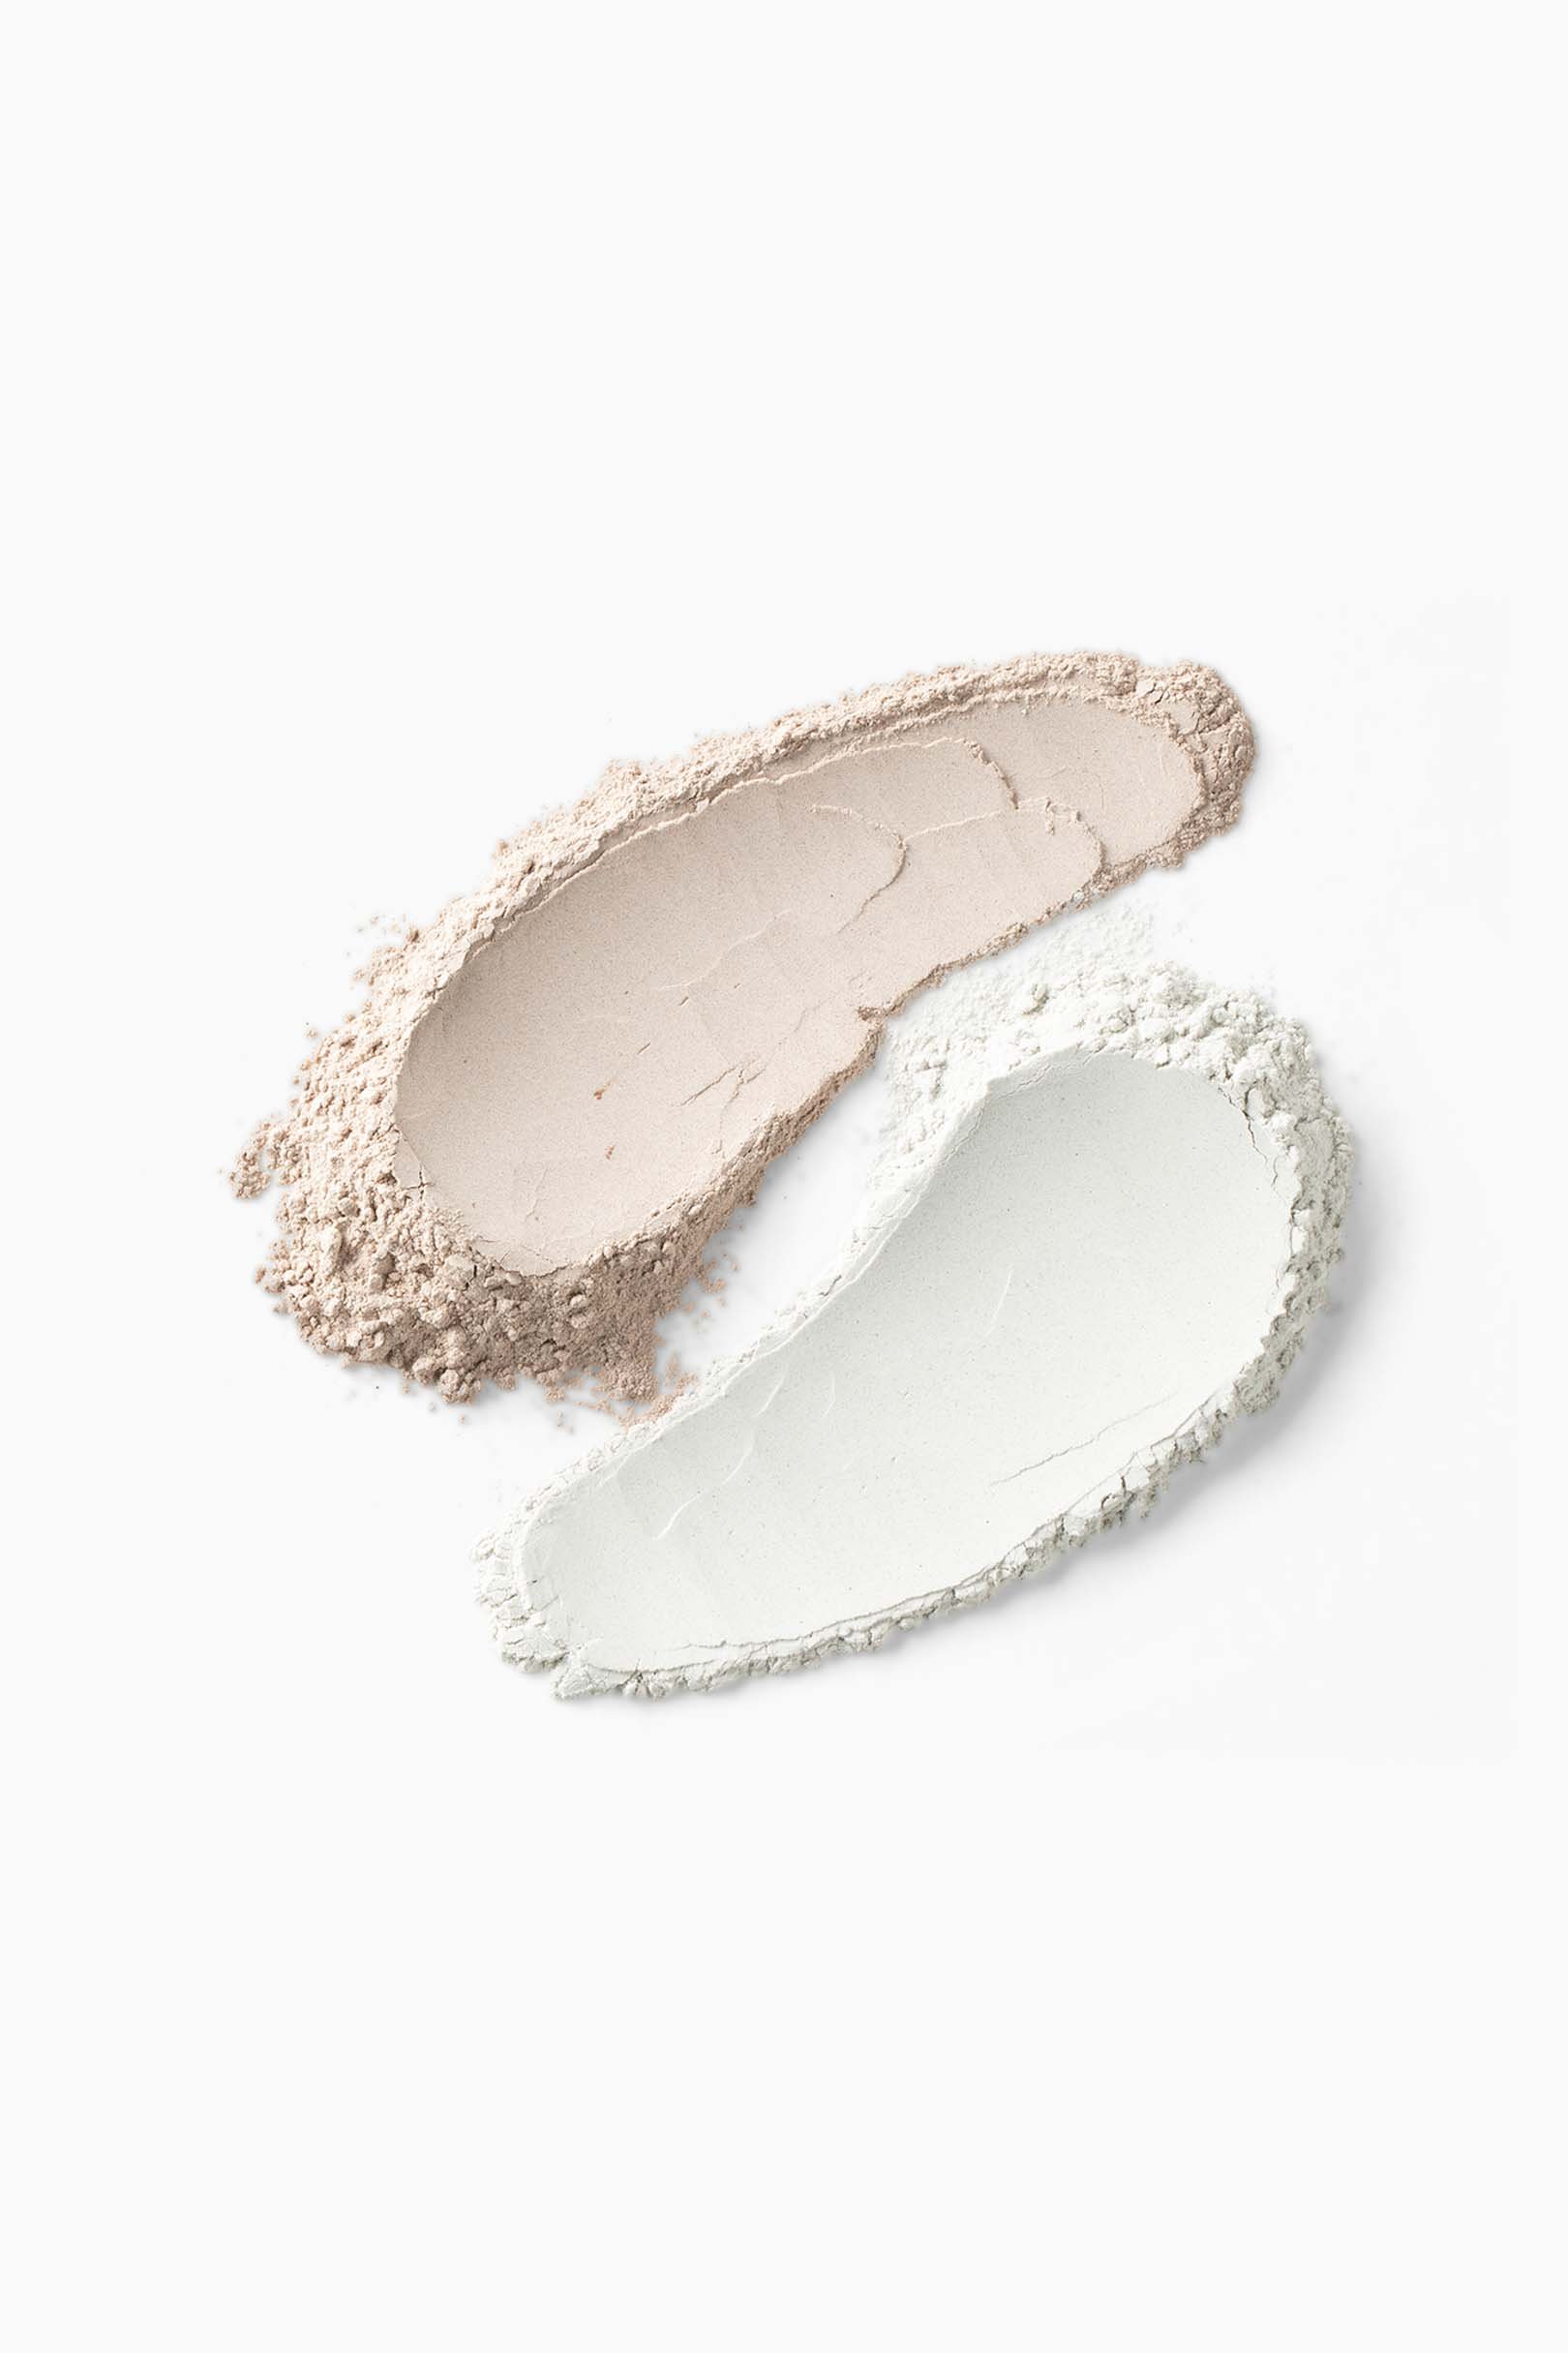 beauty powder swatch photo by jeremy lee mn product and beauty photographer